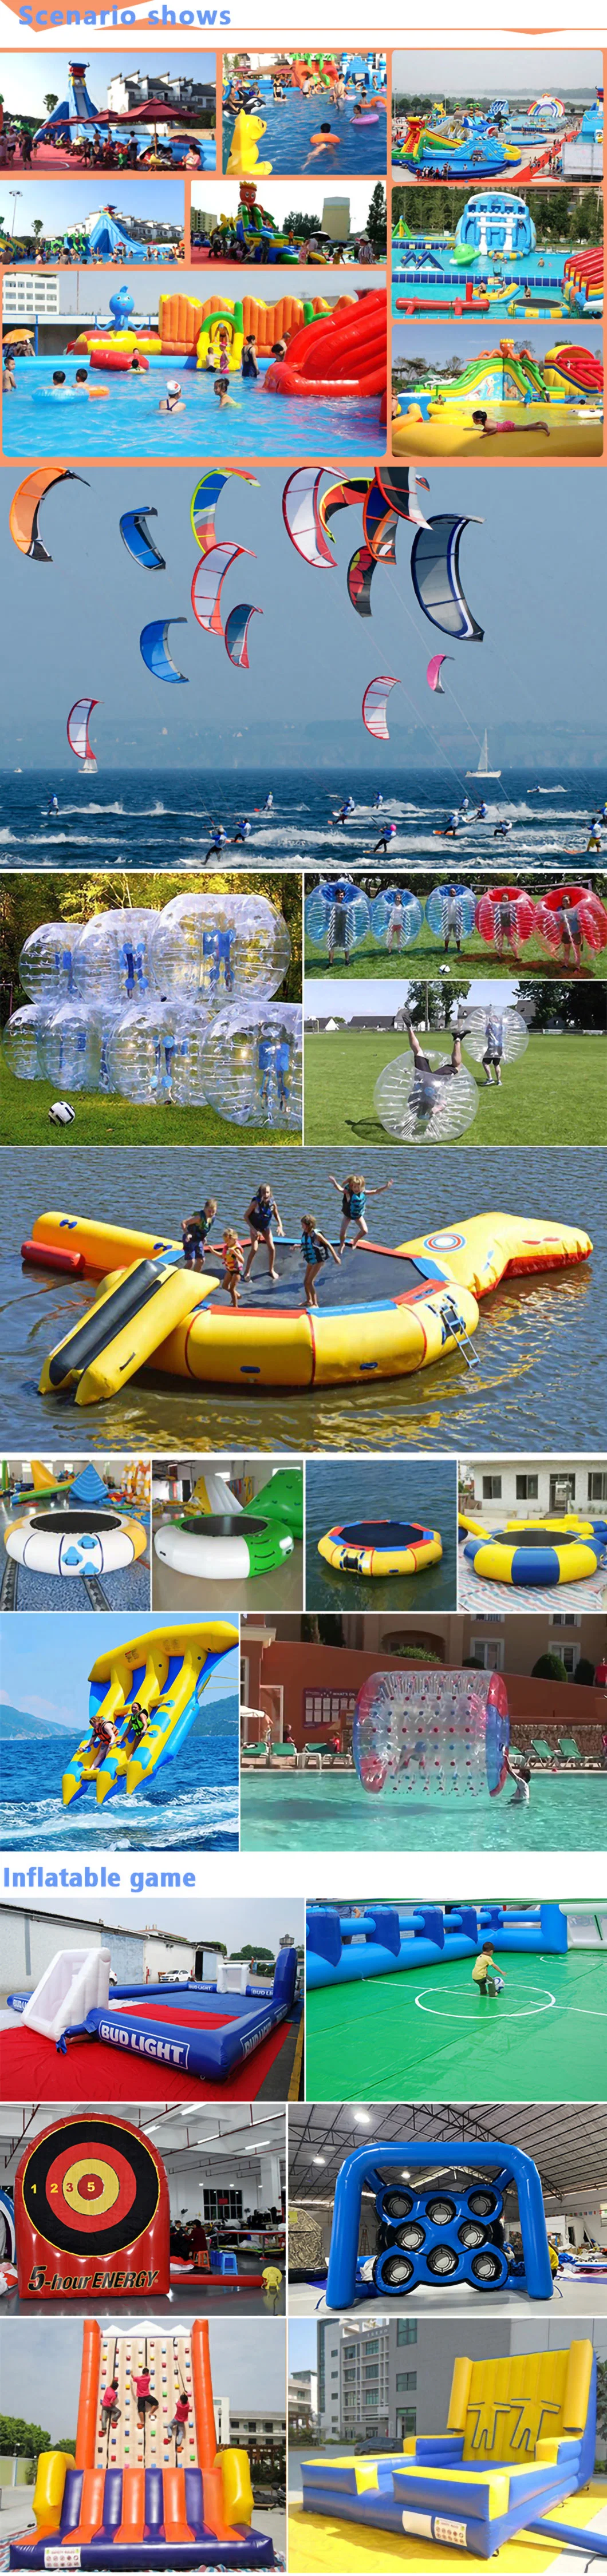 Popular Inflatable Floating Water Jumping Bed Inflatable Water Trampoline